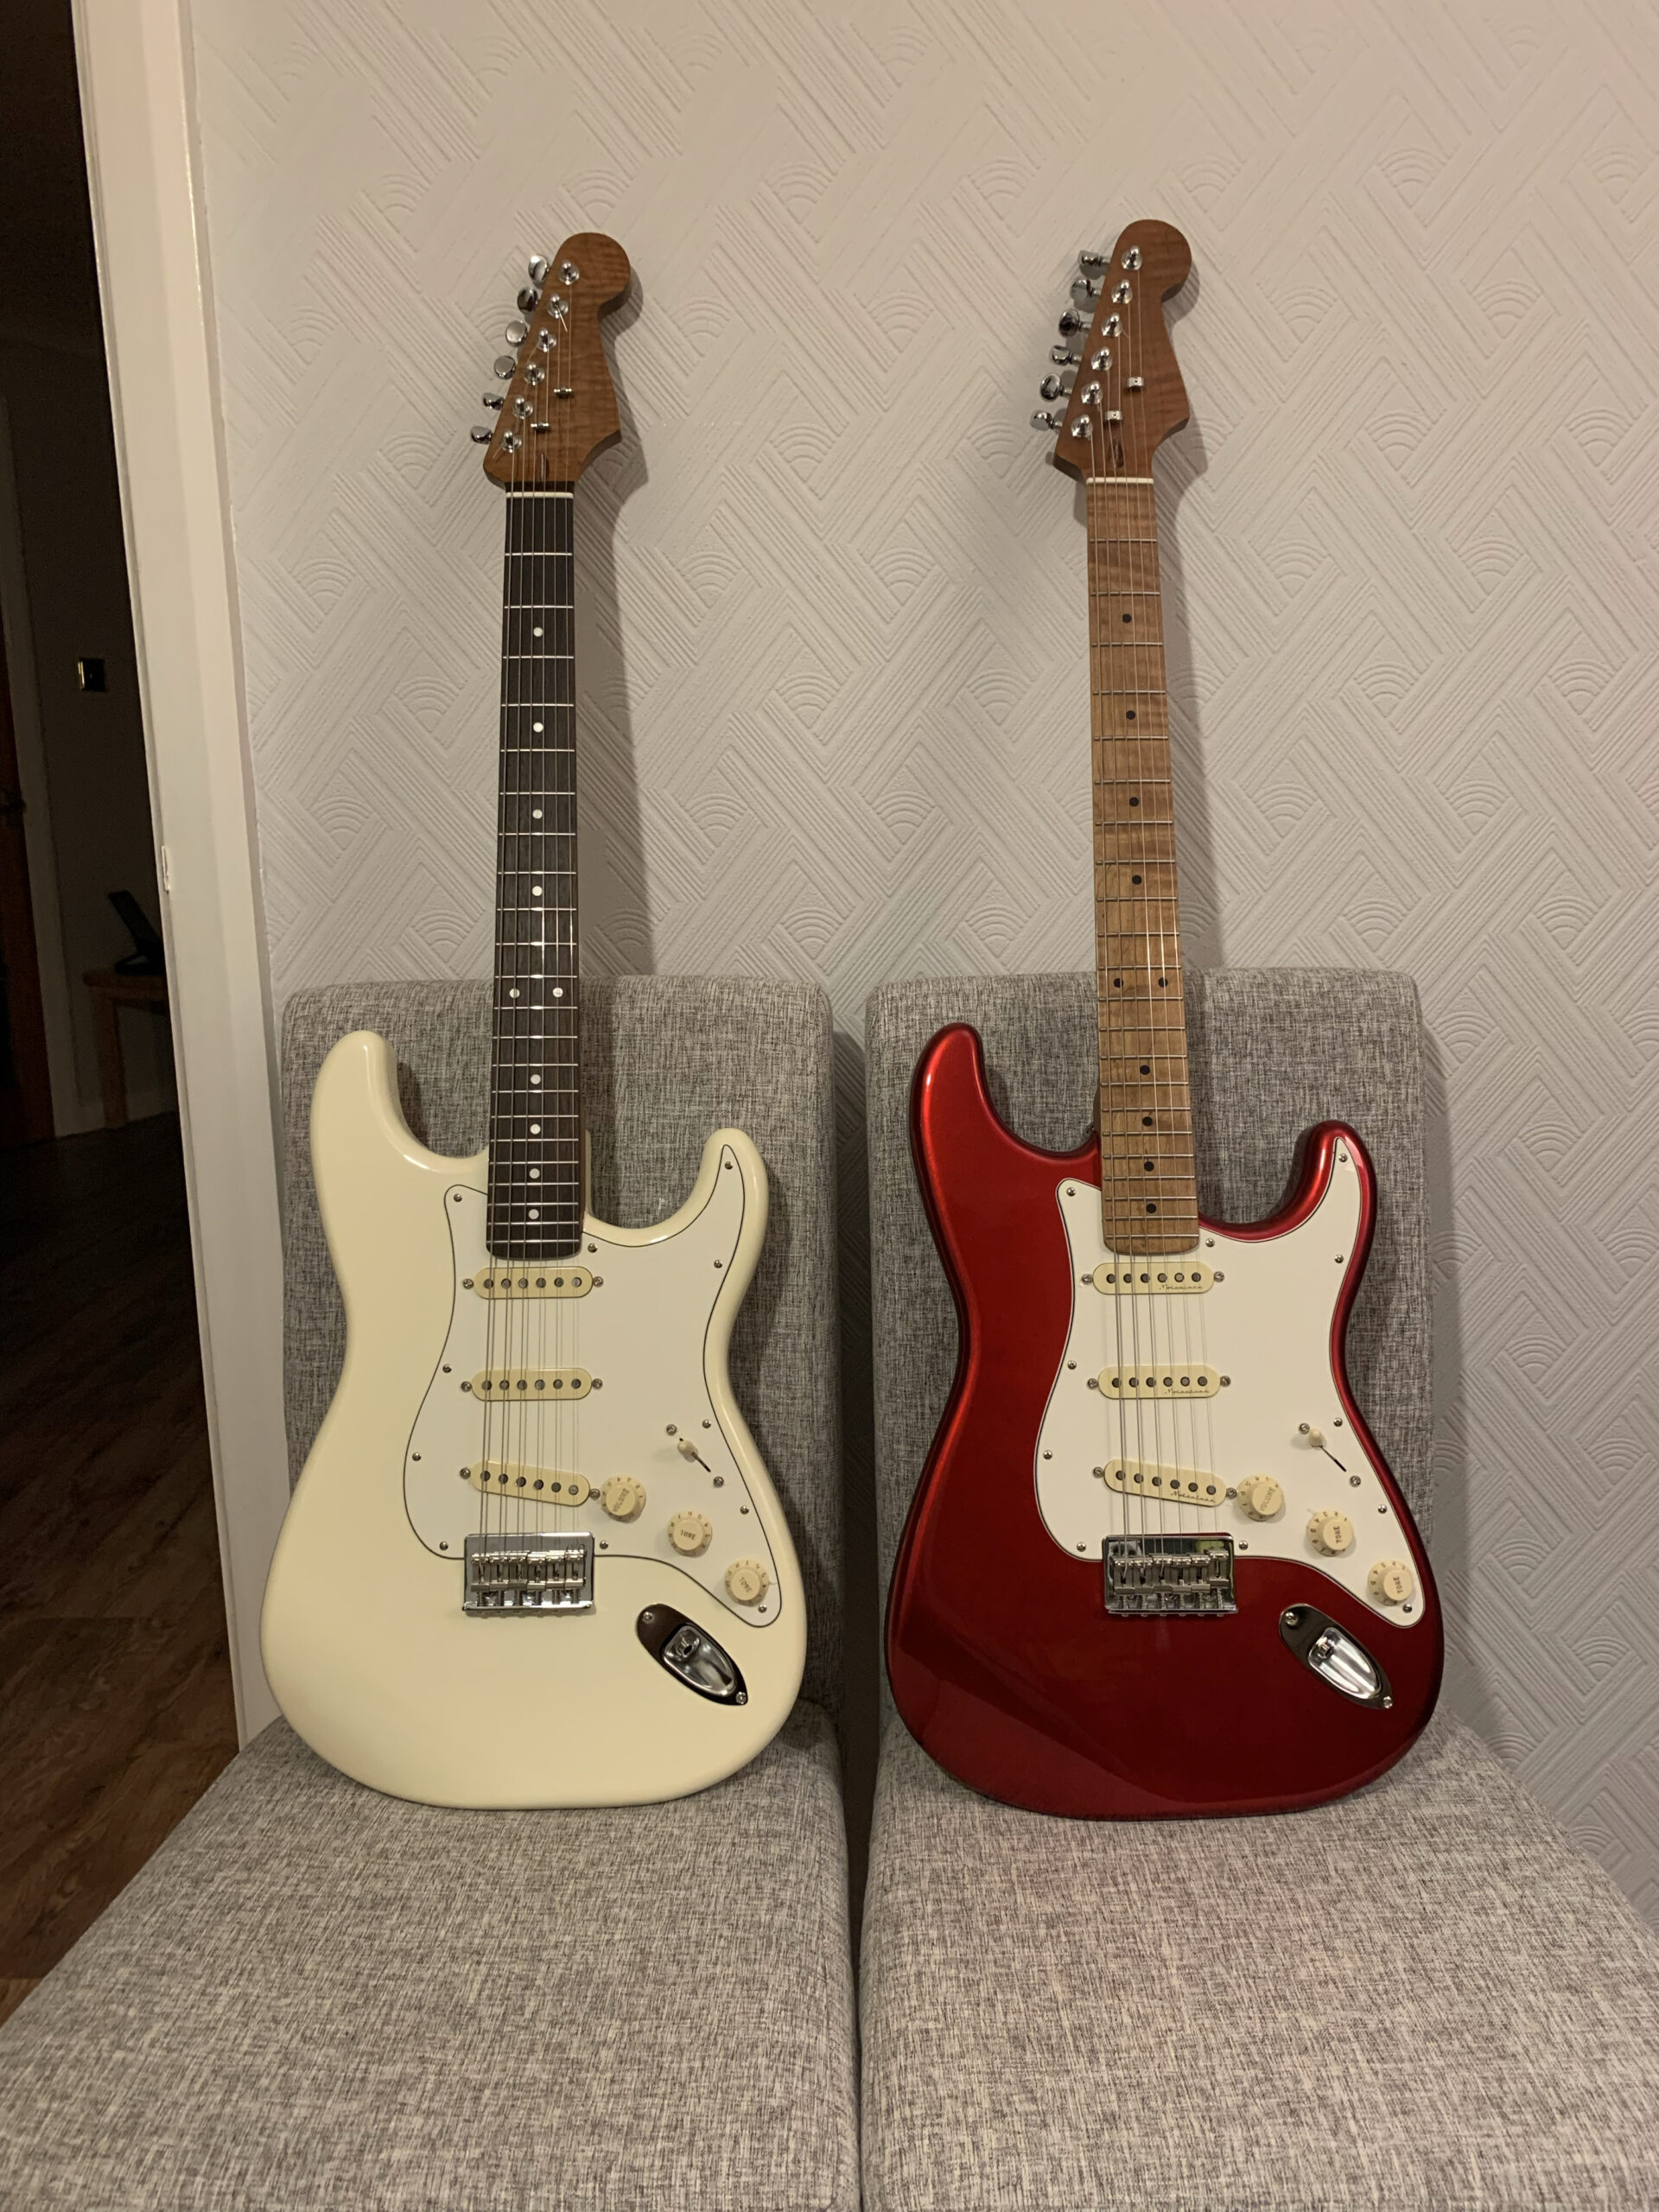 John's Strat's, both built with GA pro-series roasted flame maple necks! Lucy on the left with nice vintage voiced smooth pickups. Lucifer on the right with the hot noiseless pickups. Great builds!